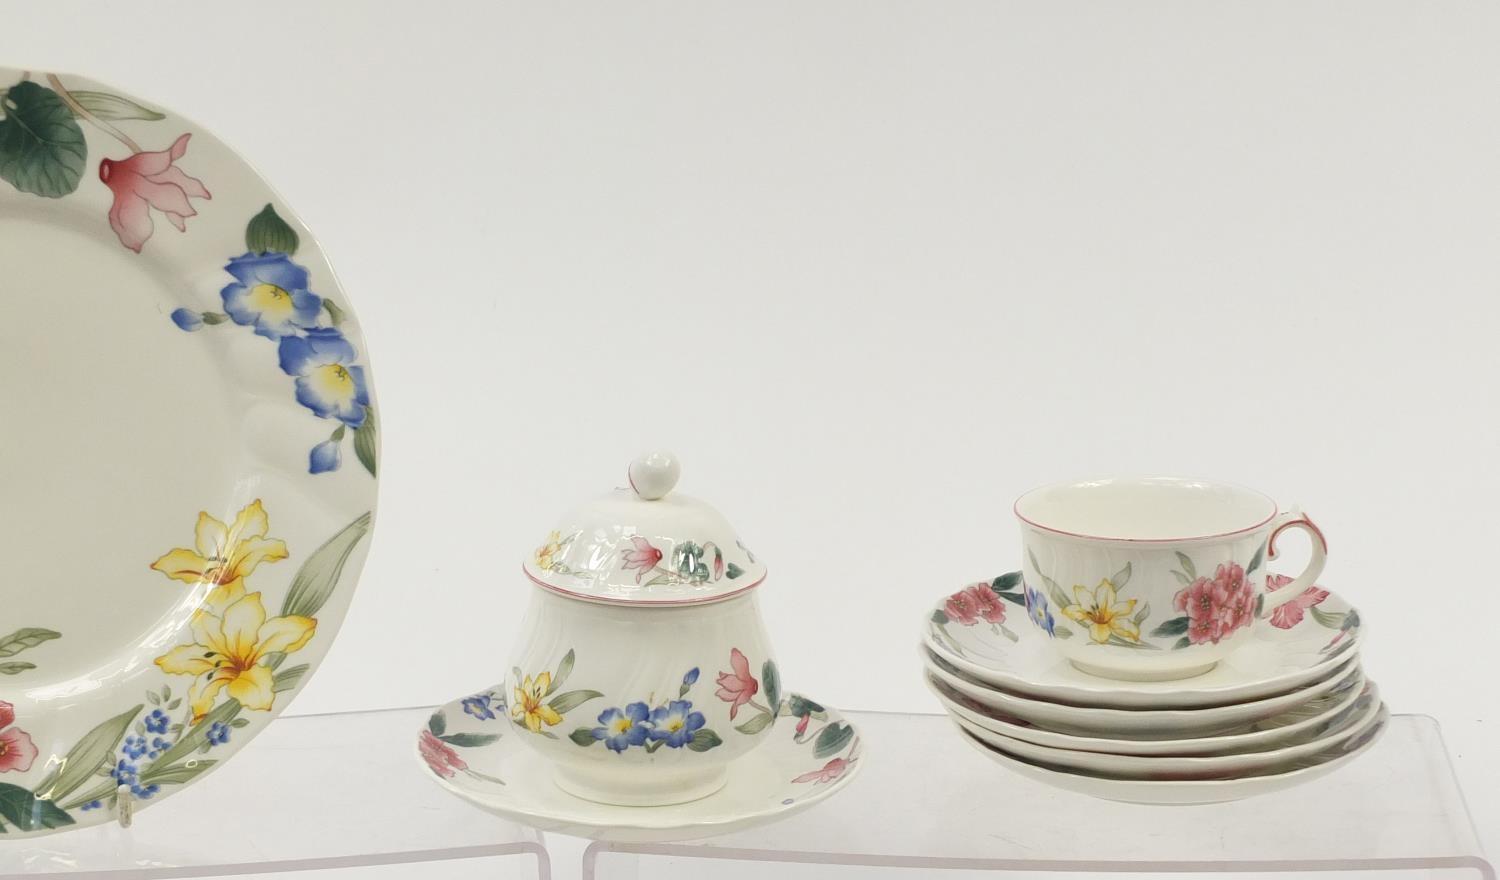 Villeroy & Boch Flora Bella dinner and teaware including plates and cups with saucers - Image 7 of 9